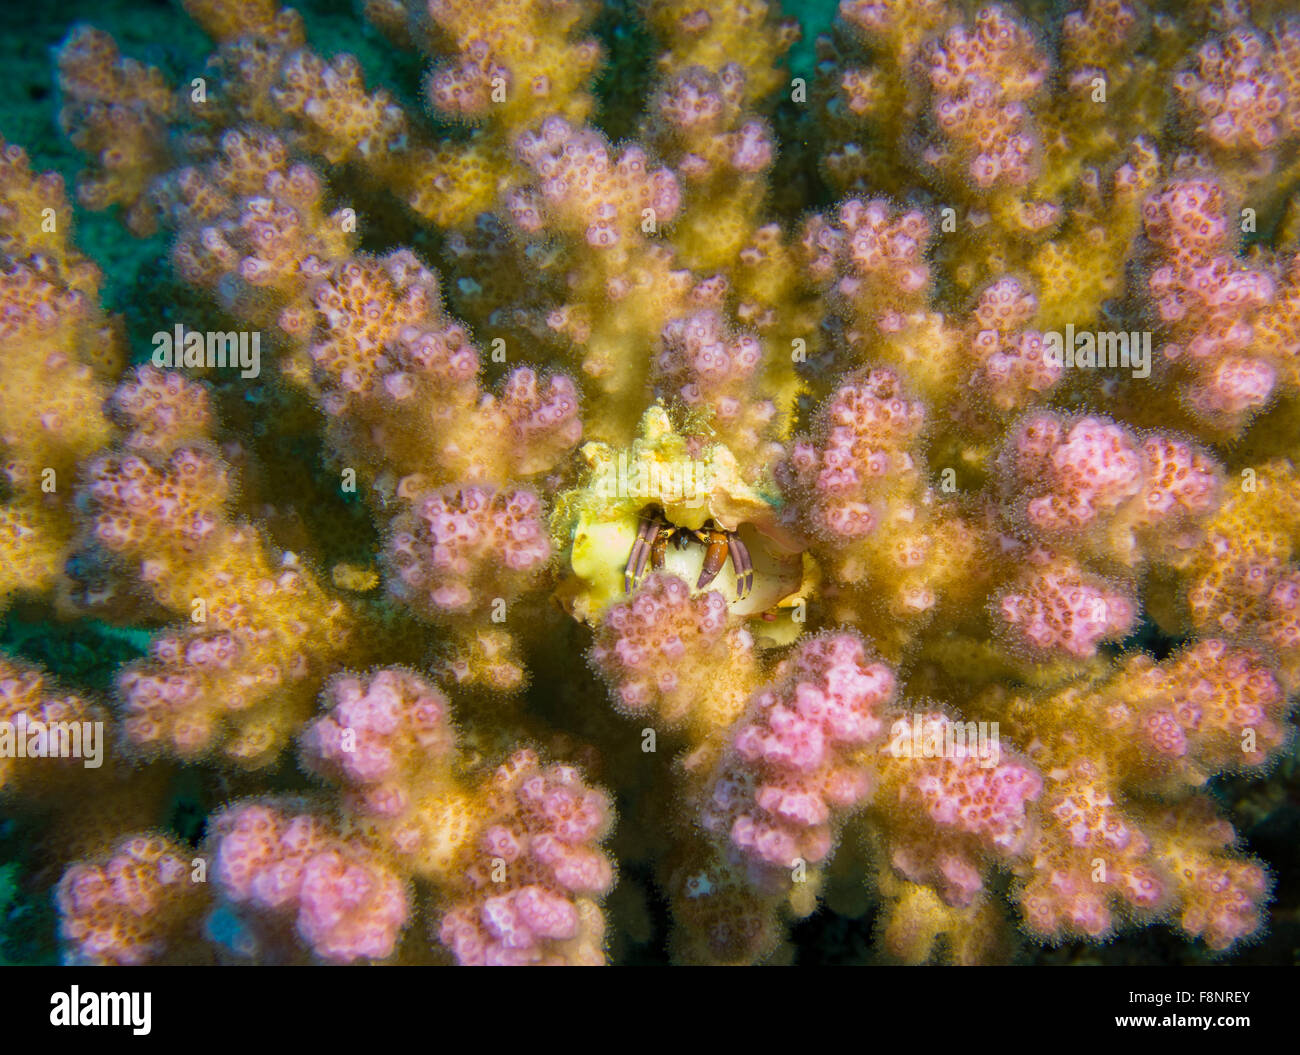 Small hermit crab, Calcinus spec., in a raspberry coral, Pocillopora, from the Red Sea, Egypt. Stock Photo